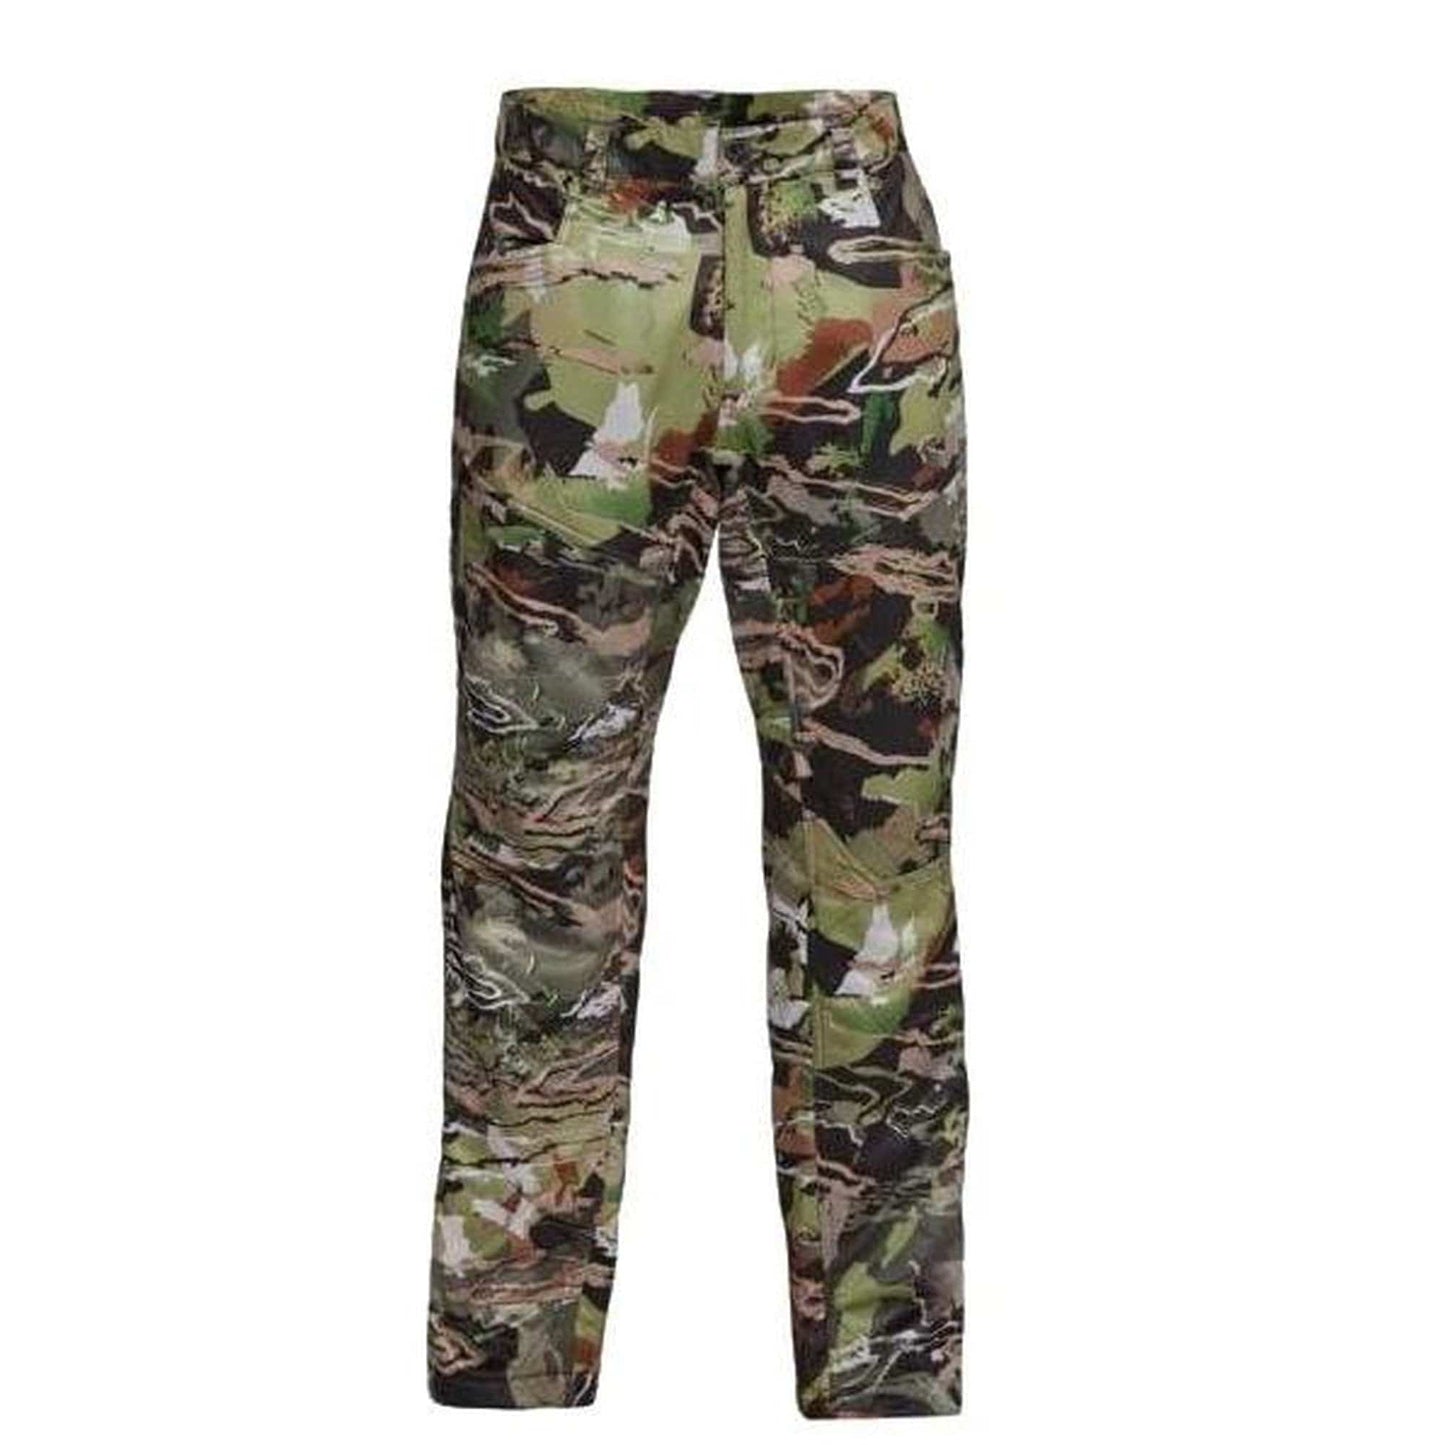 Under Armour Brow Tine ColdGear Infrared Pants by Texas Fowlers